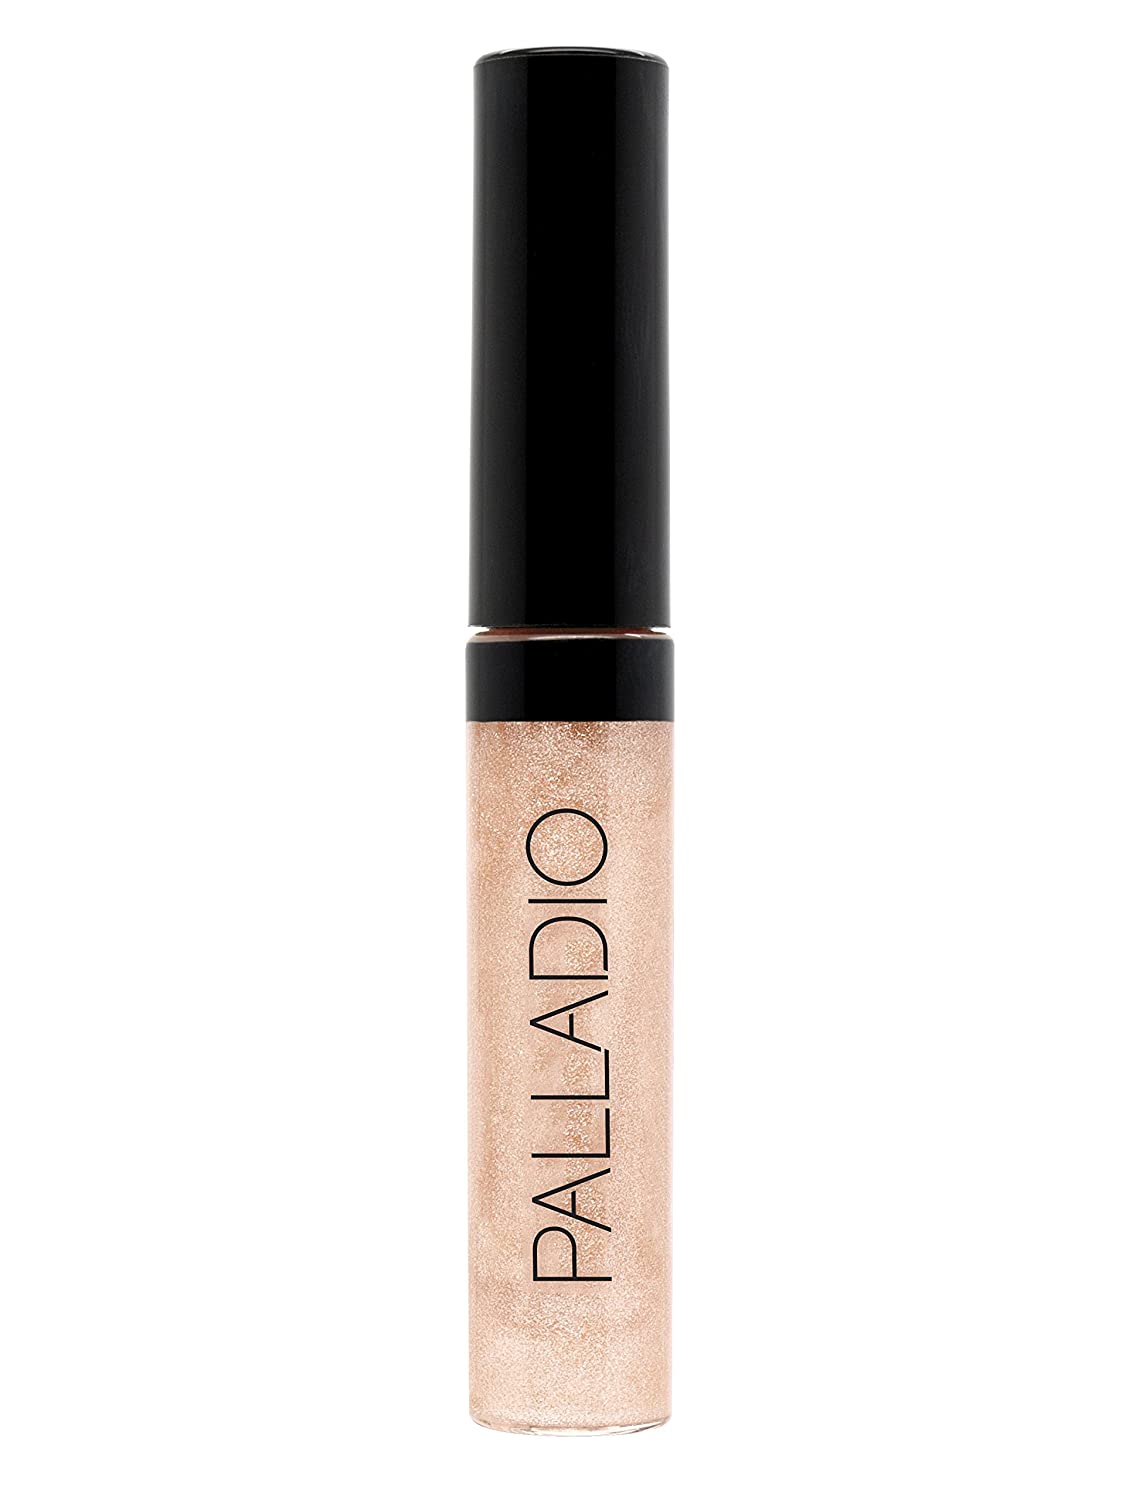 Palladio Lip Gloss, Champagne, Non-Sticky Lip Gloss, Contains Vitamin E and Aloe, Offers Intense Color and Moisturization, Minimizes Lip Wrinkles, Softens Lips with Beautiful Shiny Finish. Cruelty Free.